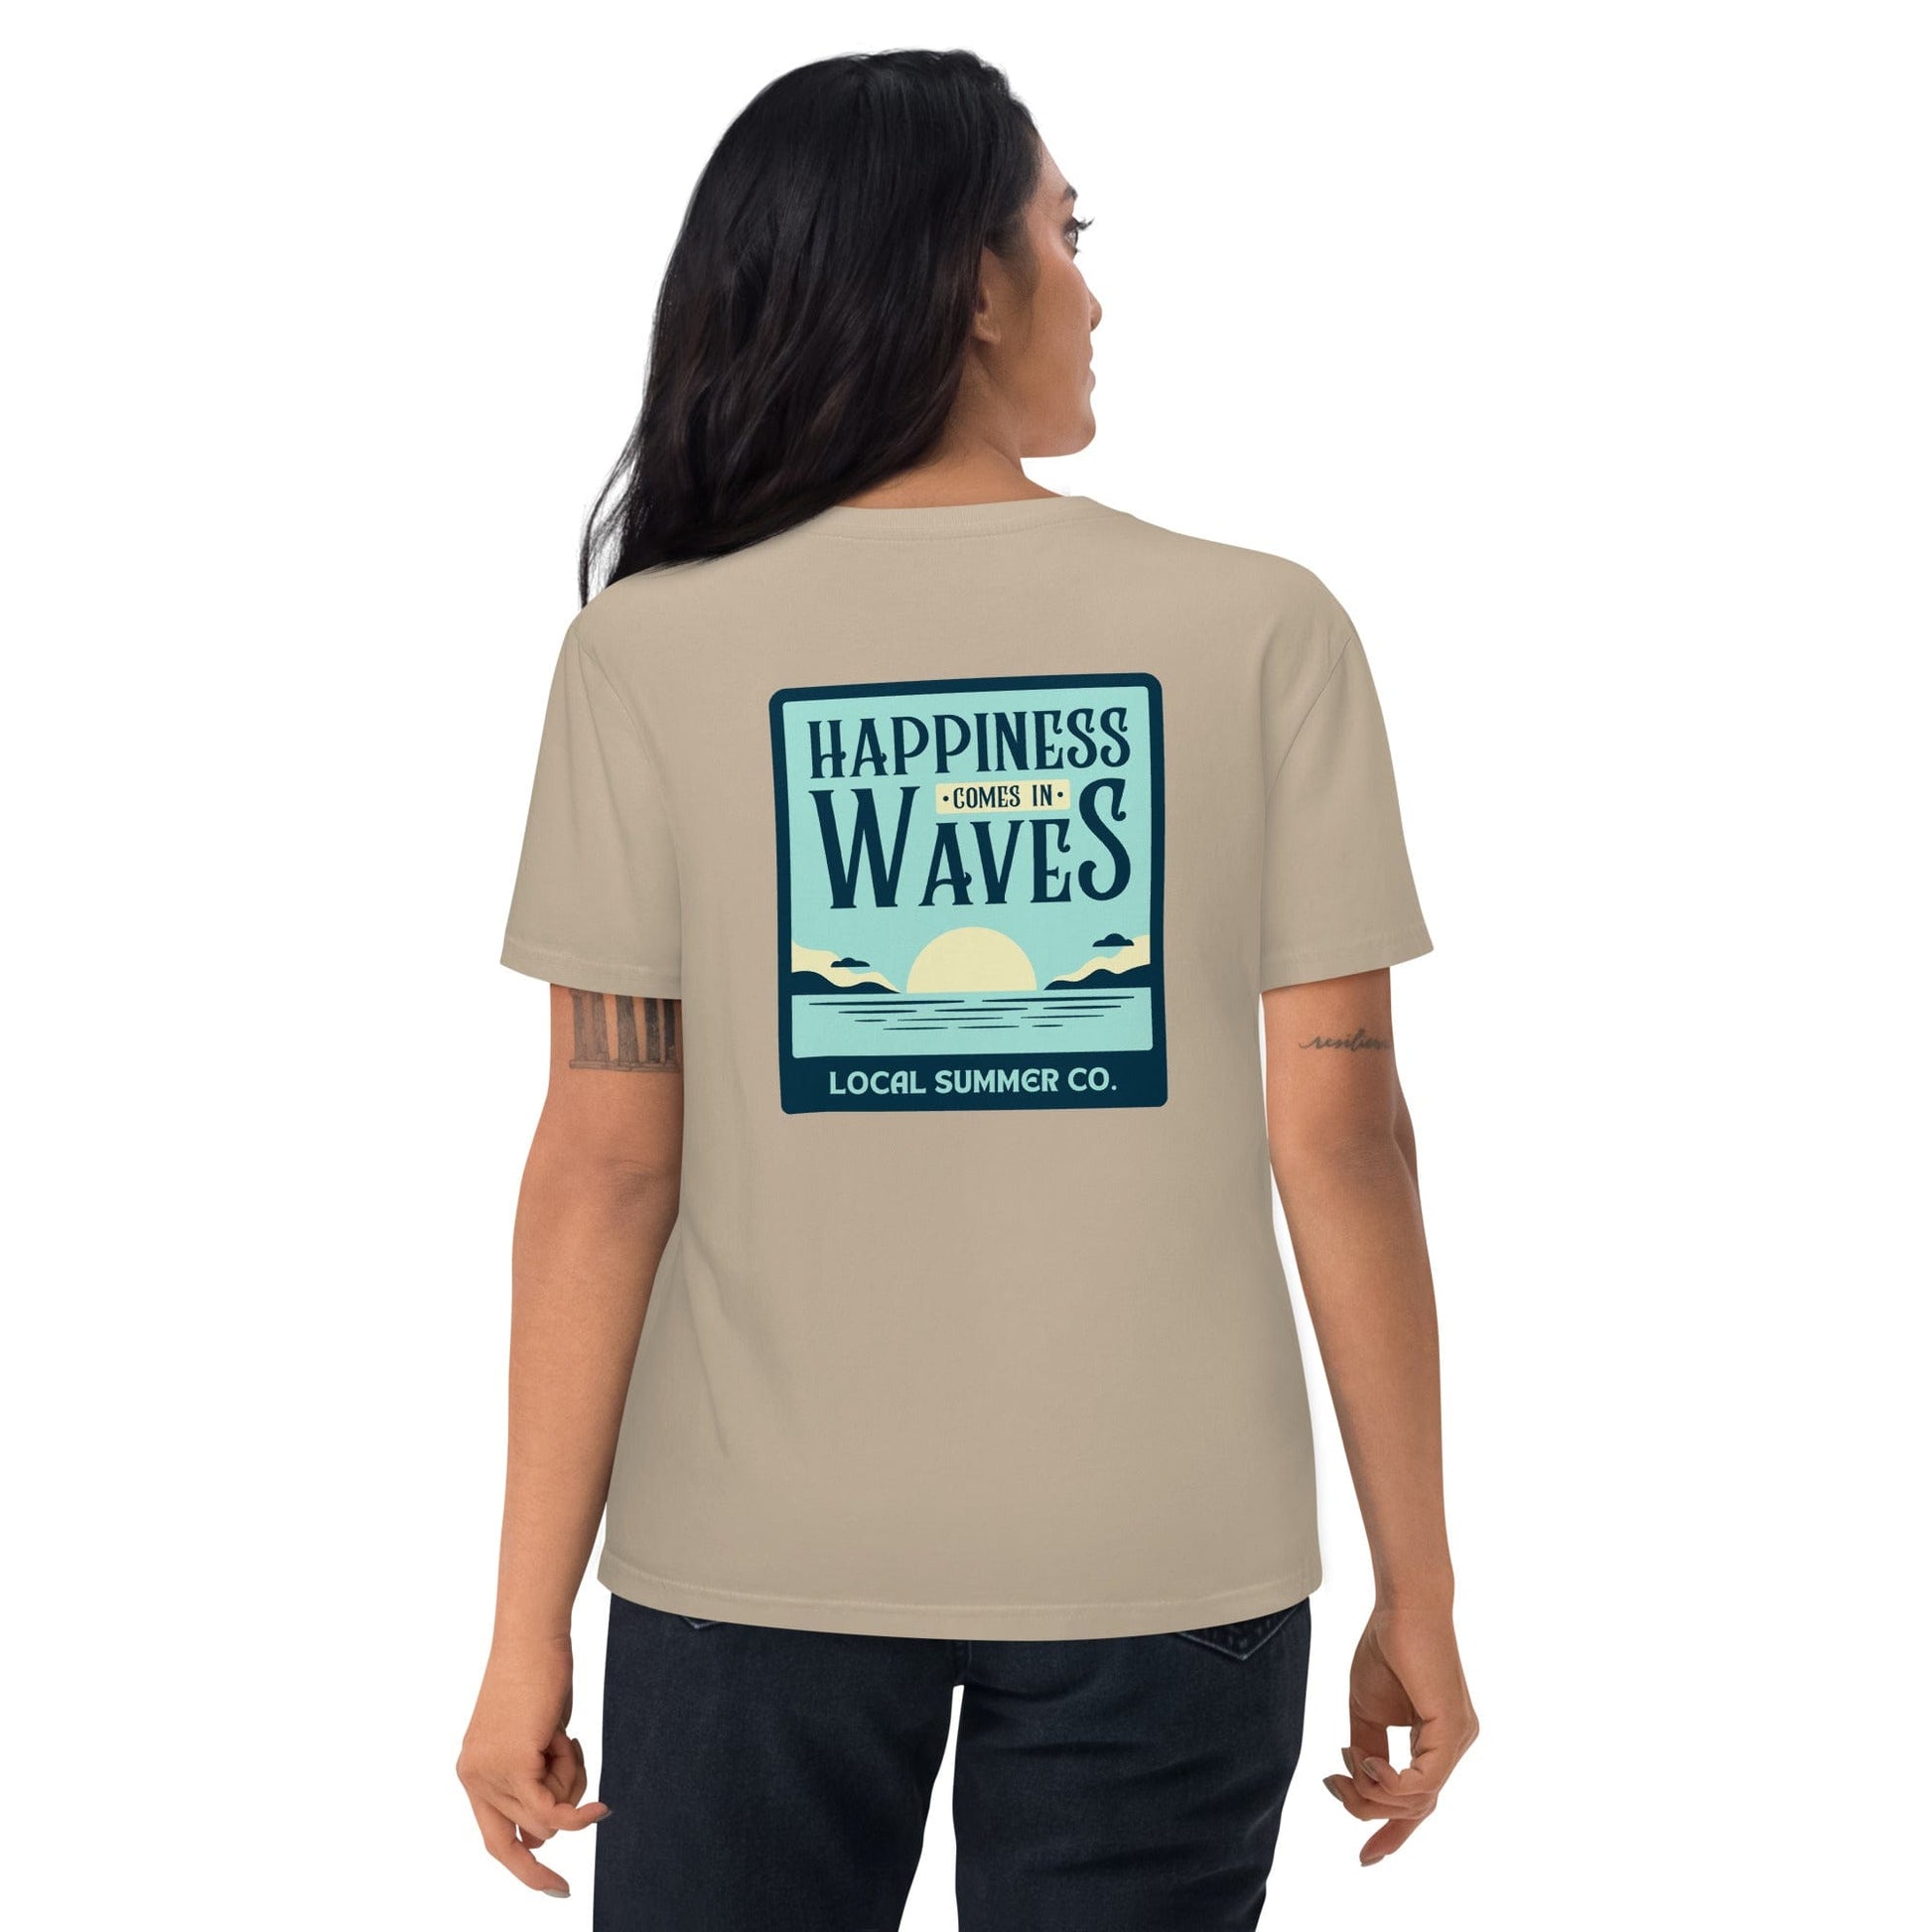 Local Summer Collective Desert Dust / S Waves Of Happiness Unisex Organic Cotton T-Shirt